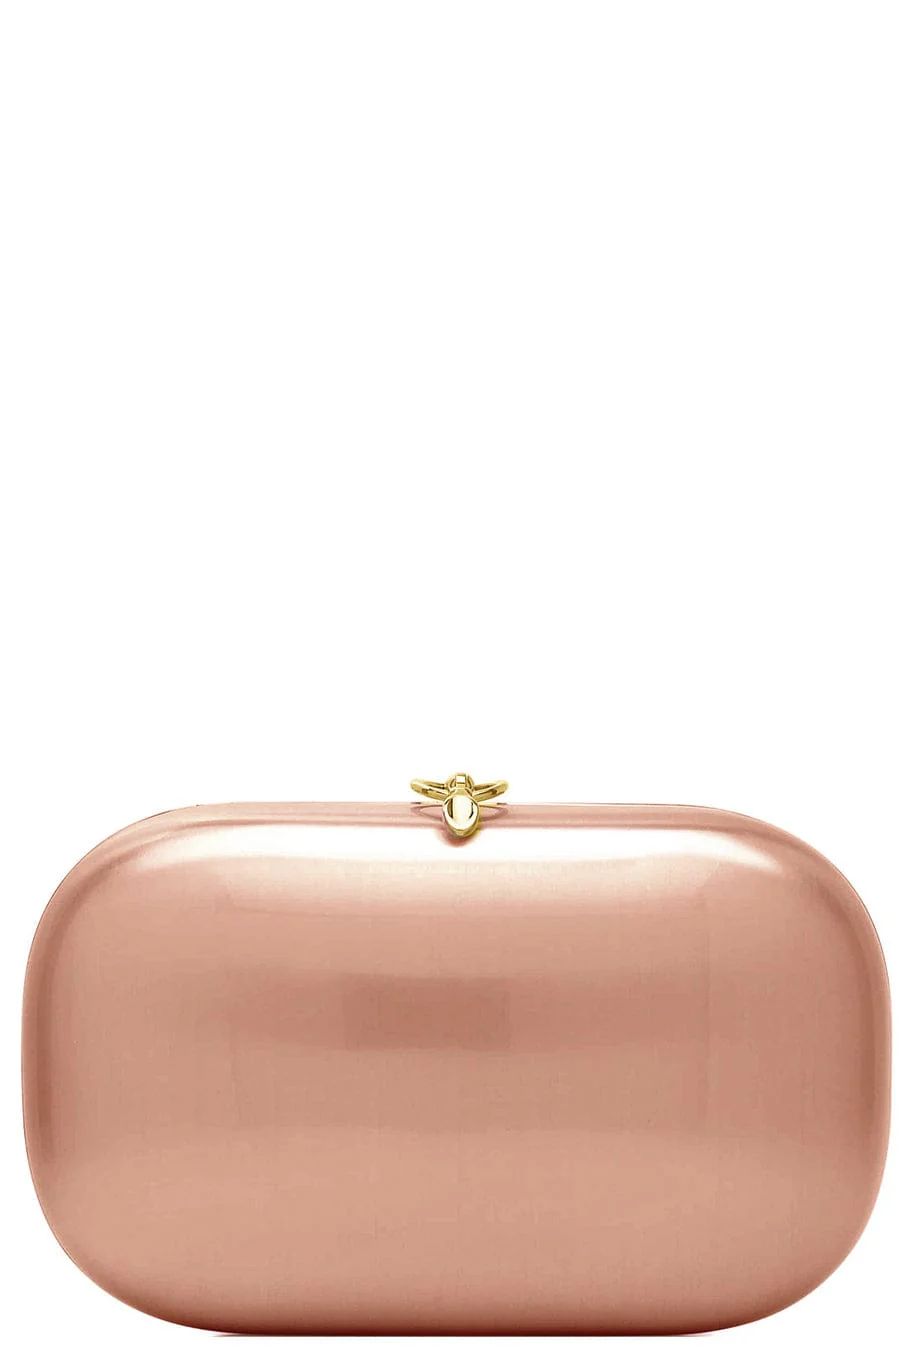 Elina Plus Clutch - Rosegold | Marissa Collections